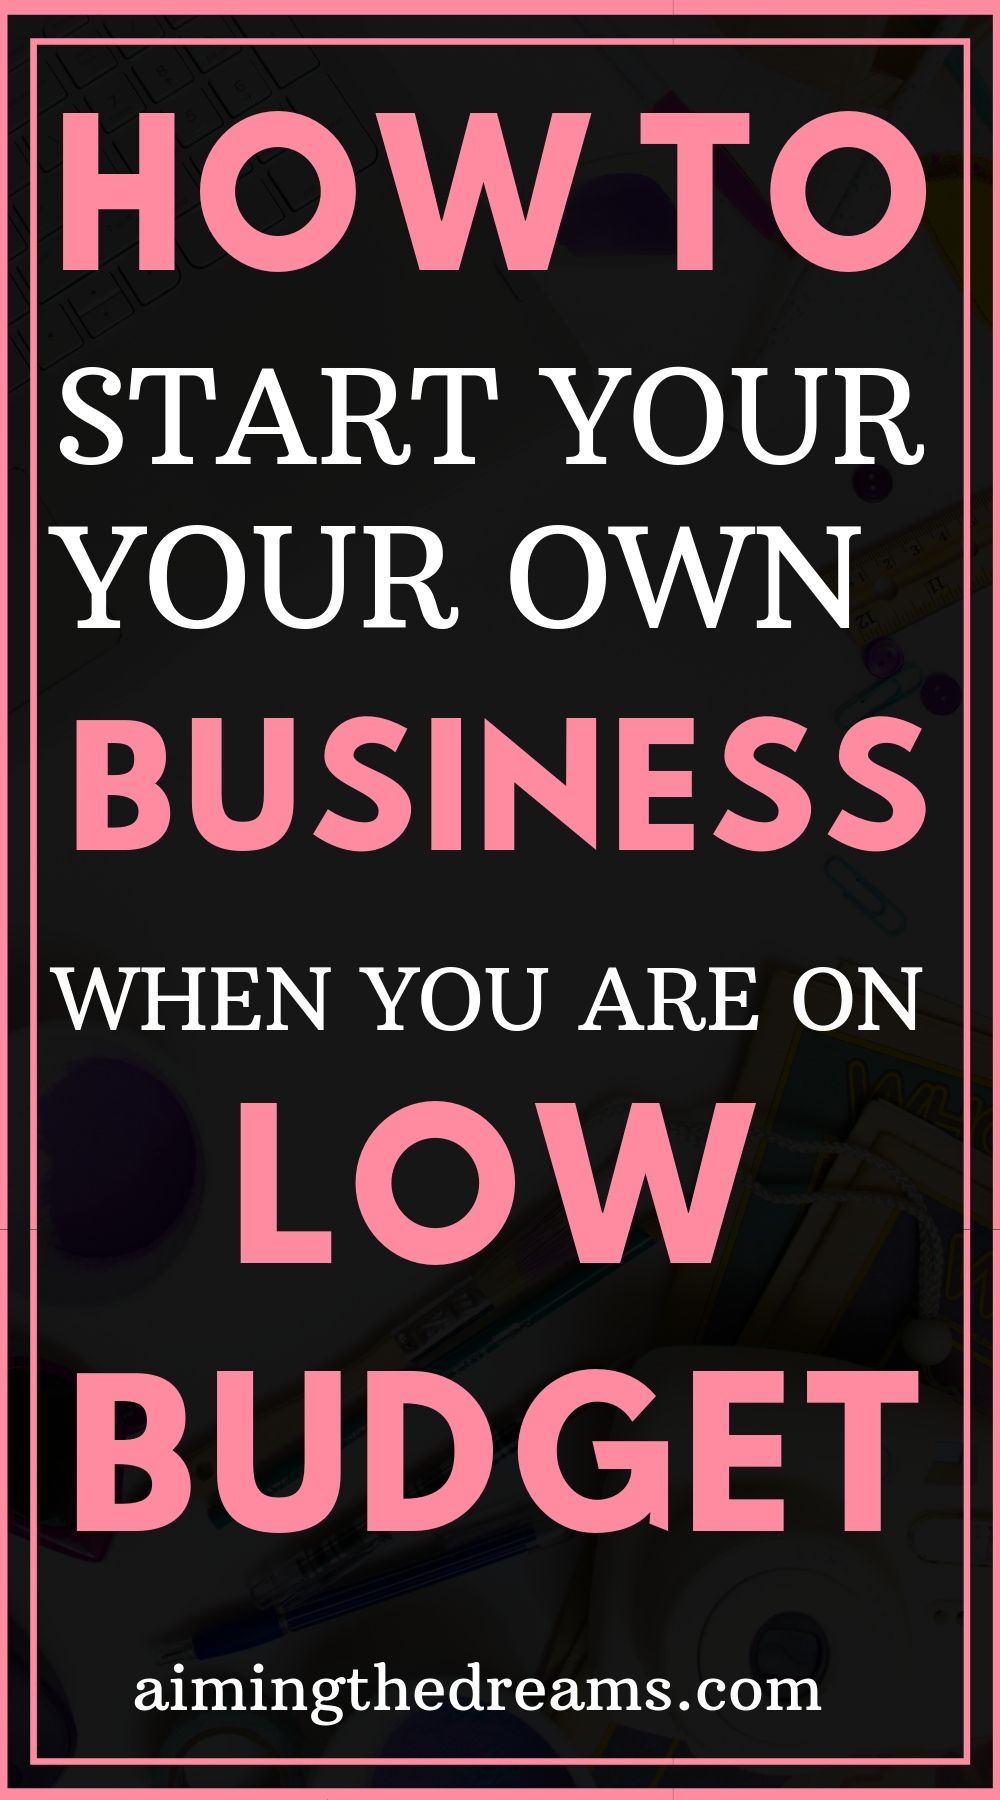 How to start a business on low budget